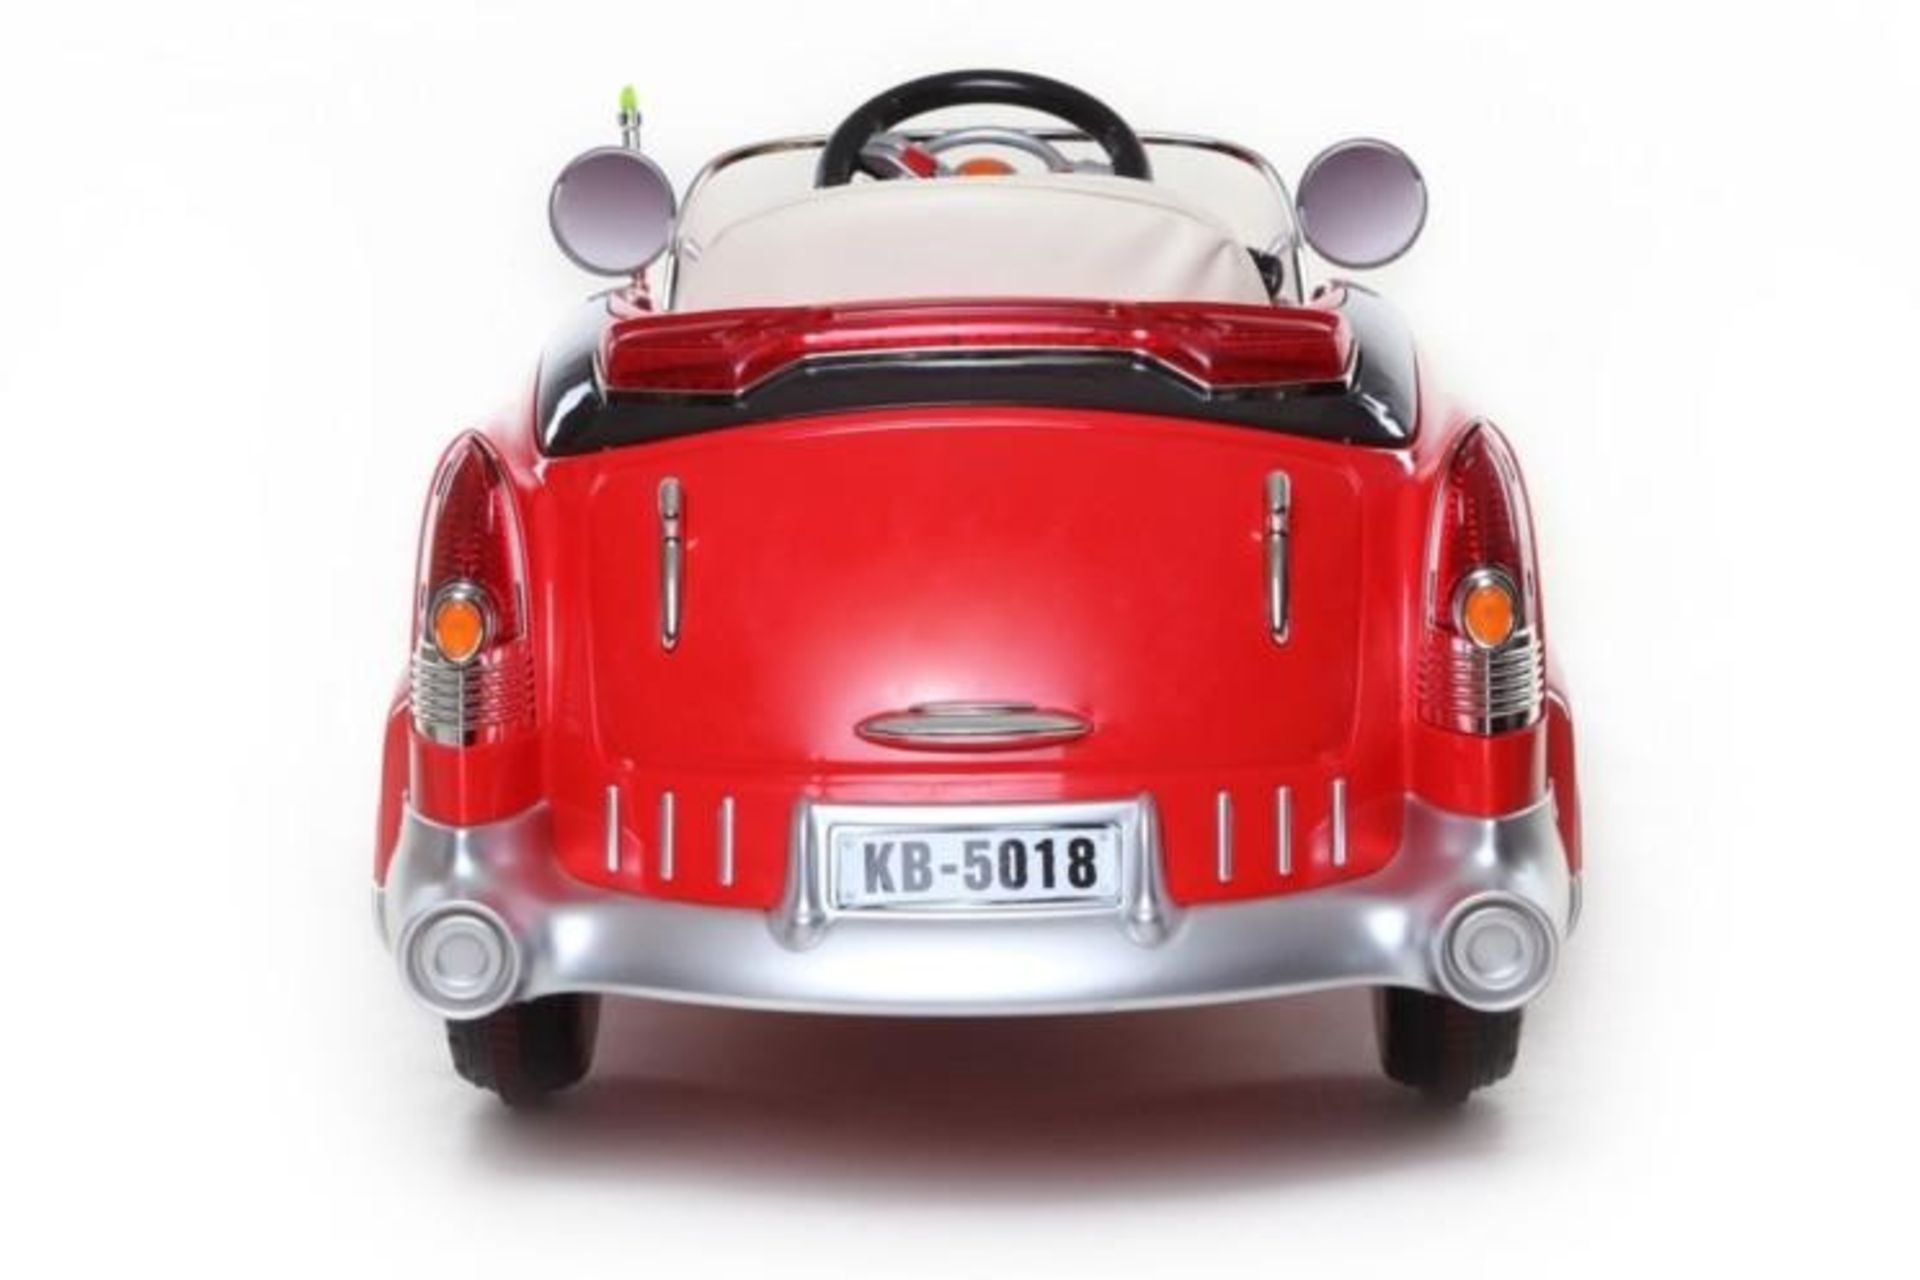 V Brand New 12v Classic 1950's Retro American Style Ride On Electric Car For Kids - Parental - Image 2 of 2